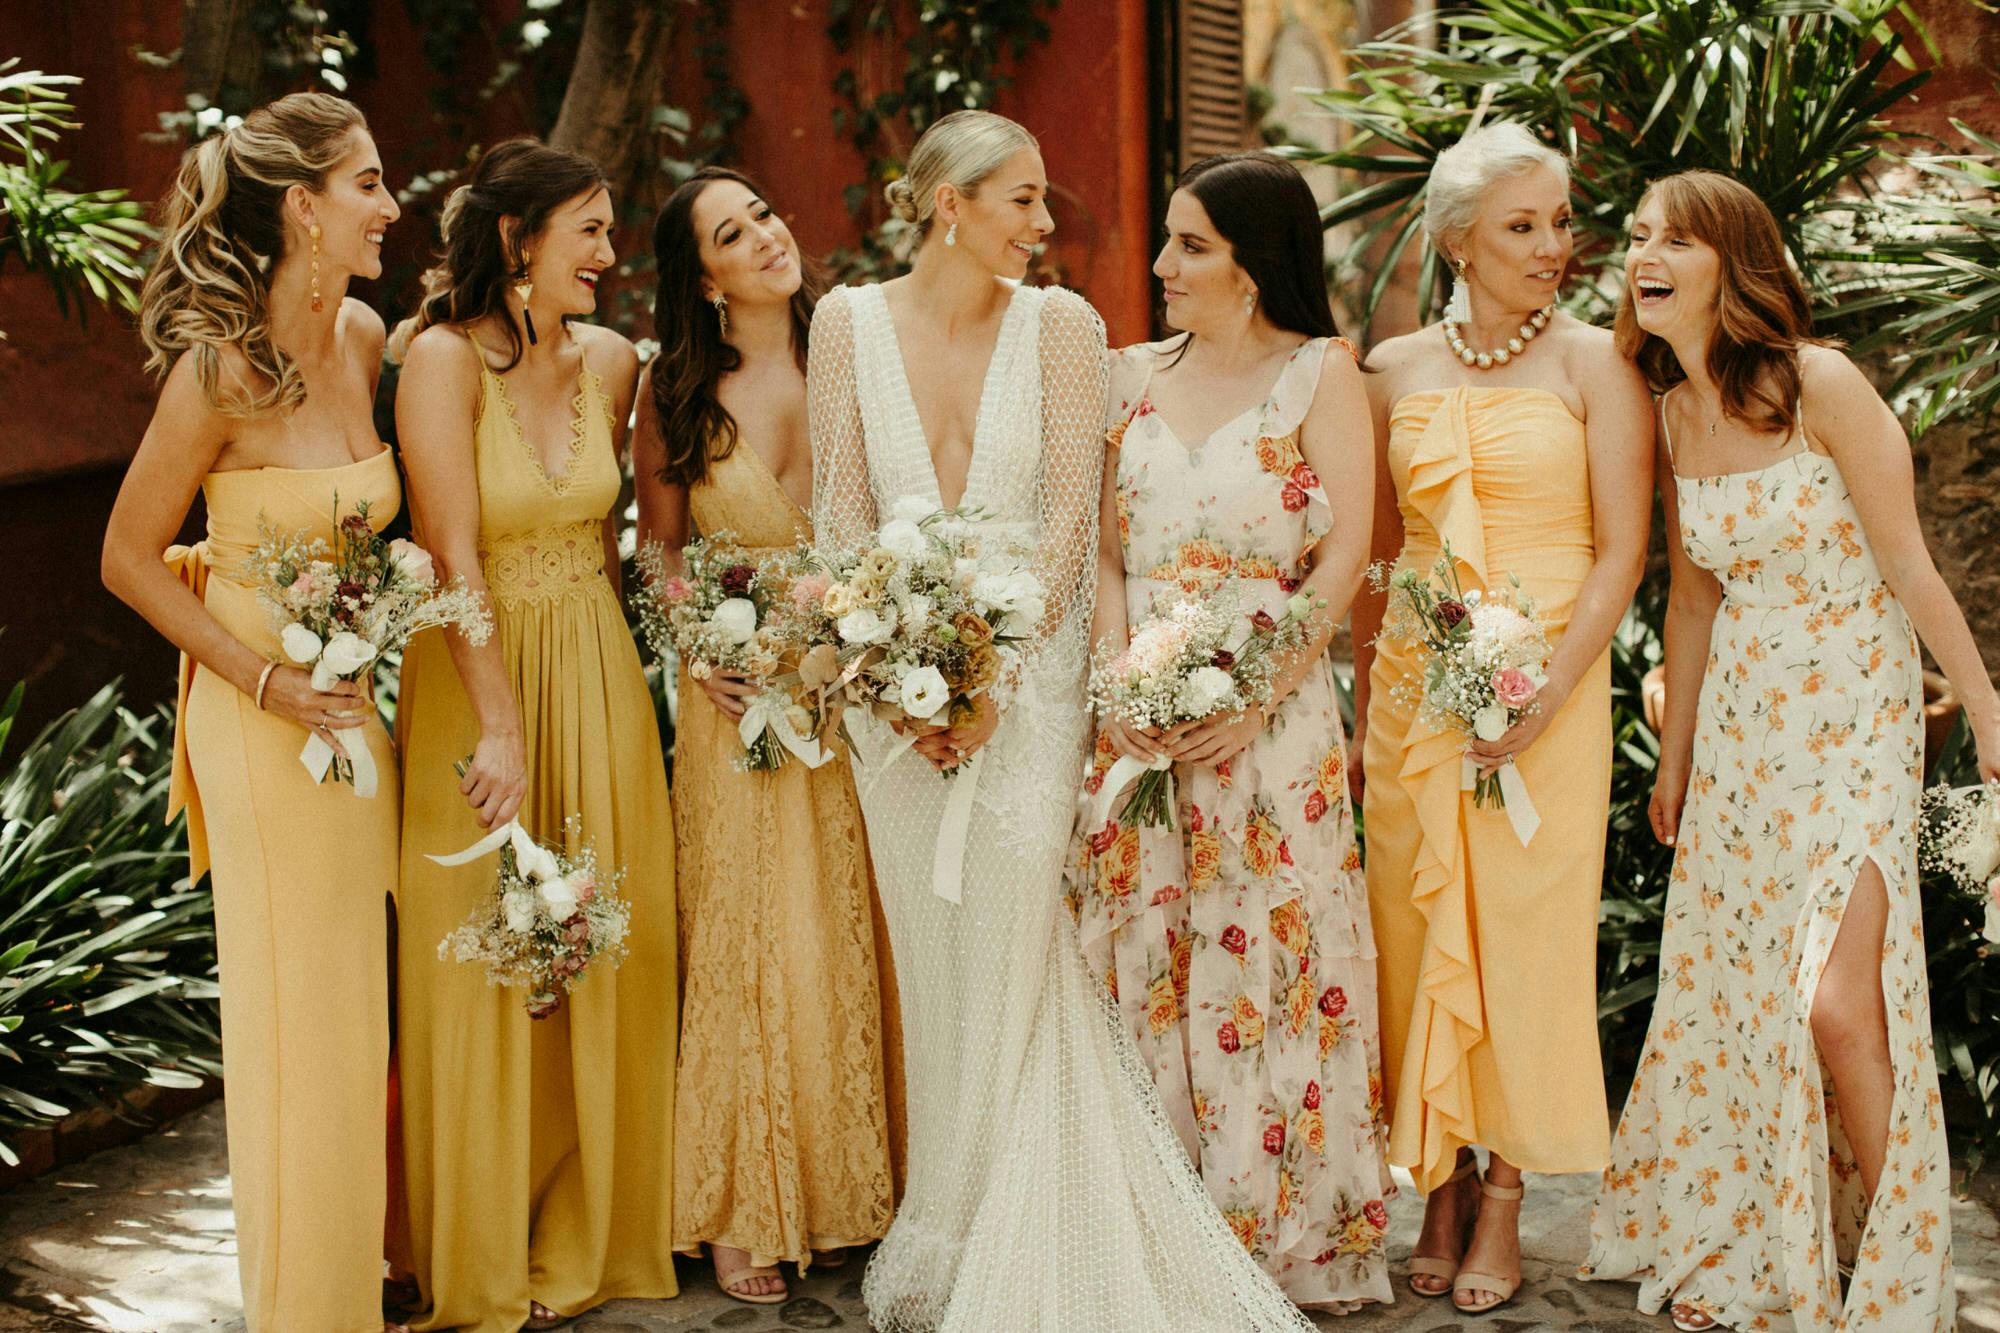 candid shots of bridal party